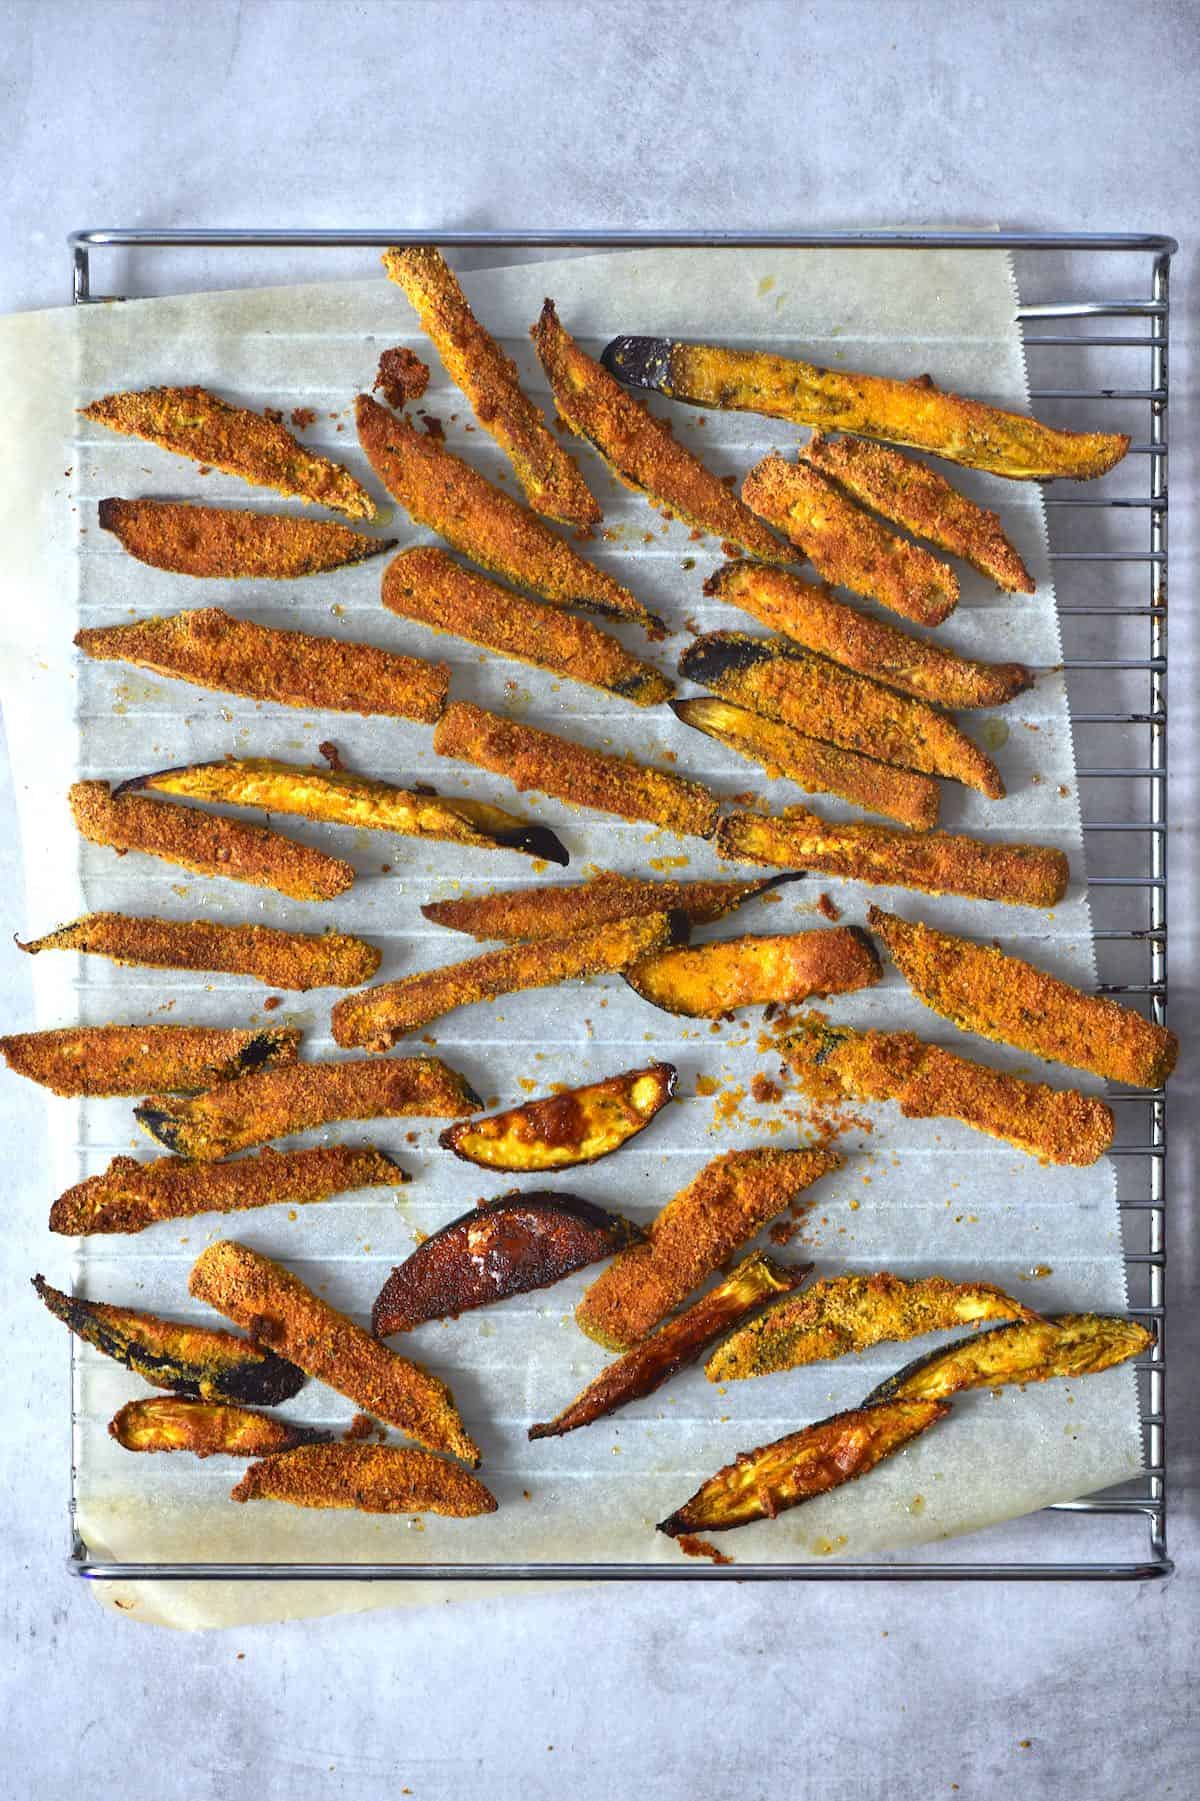 Baked eggplant fries on a baking tray